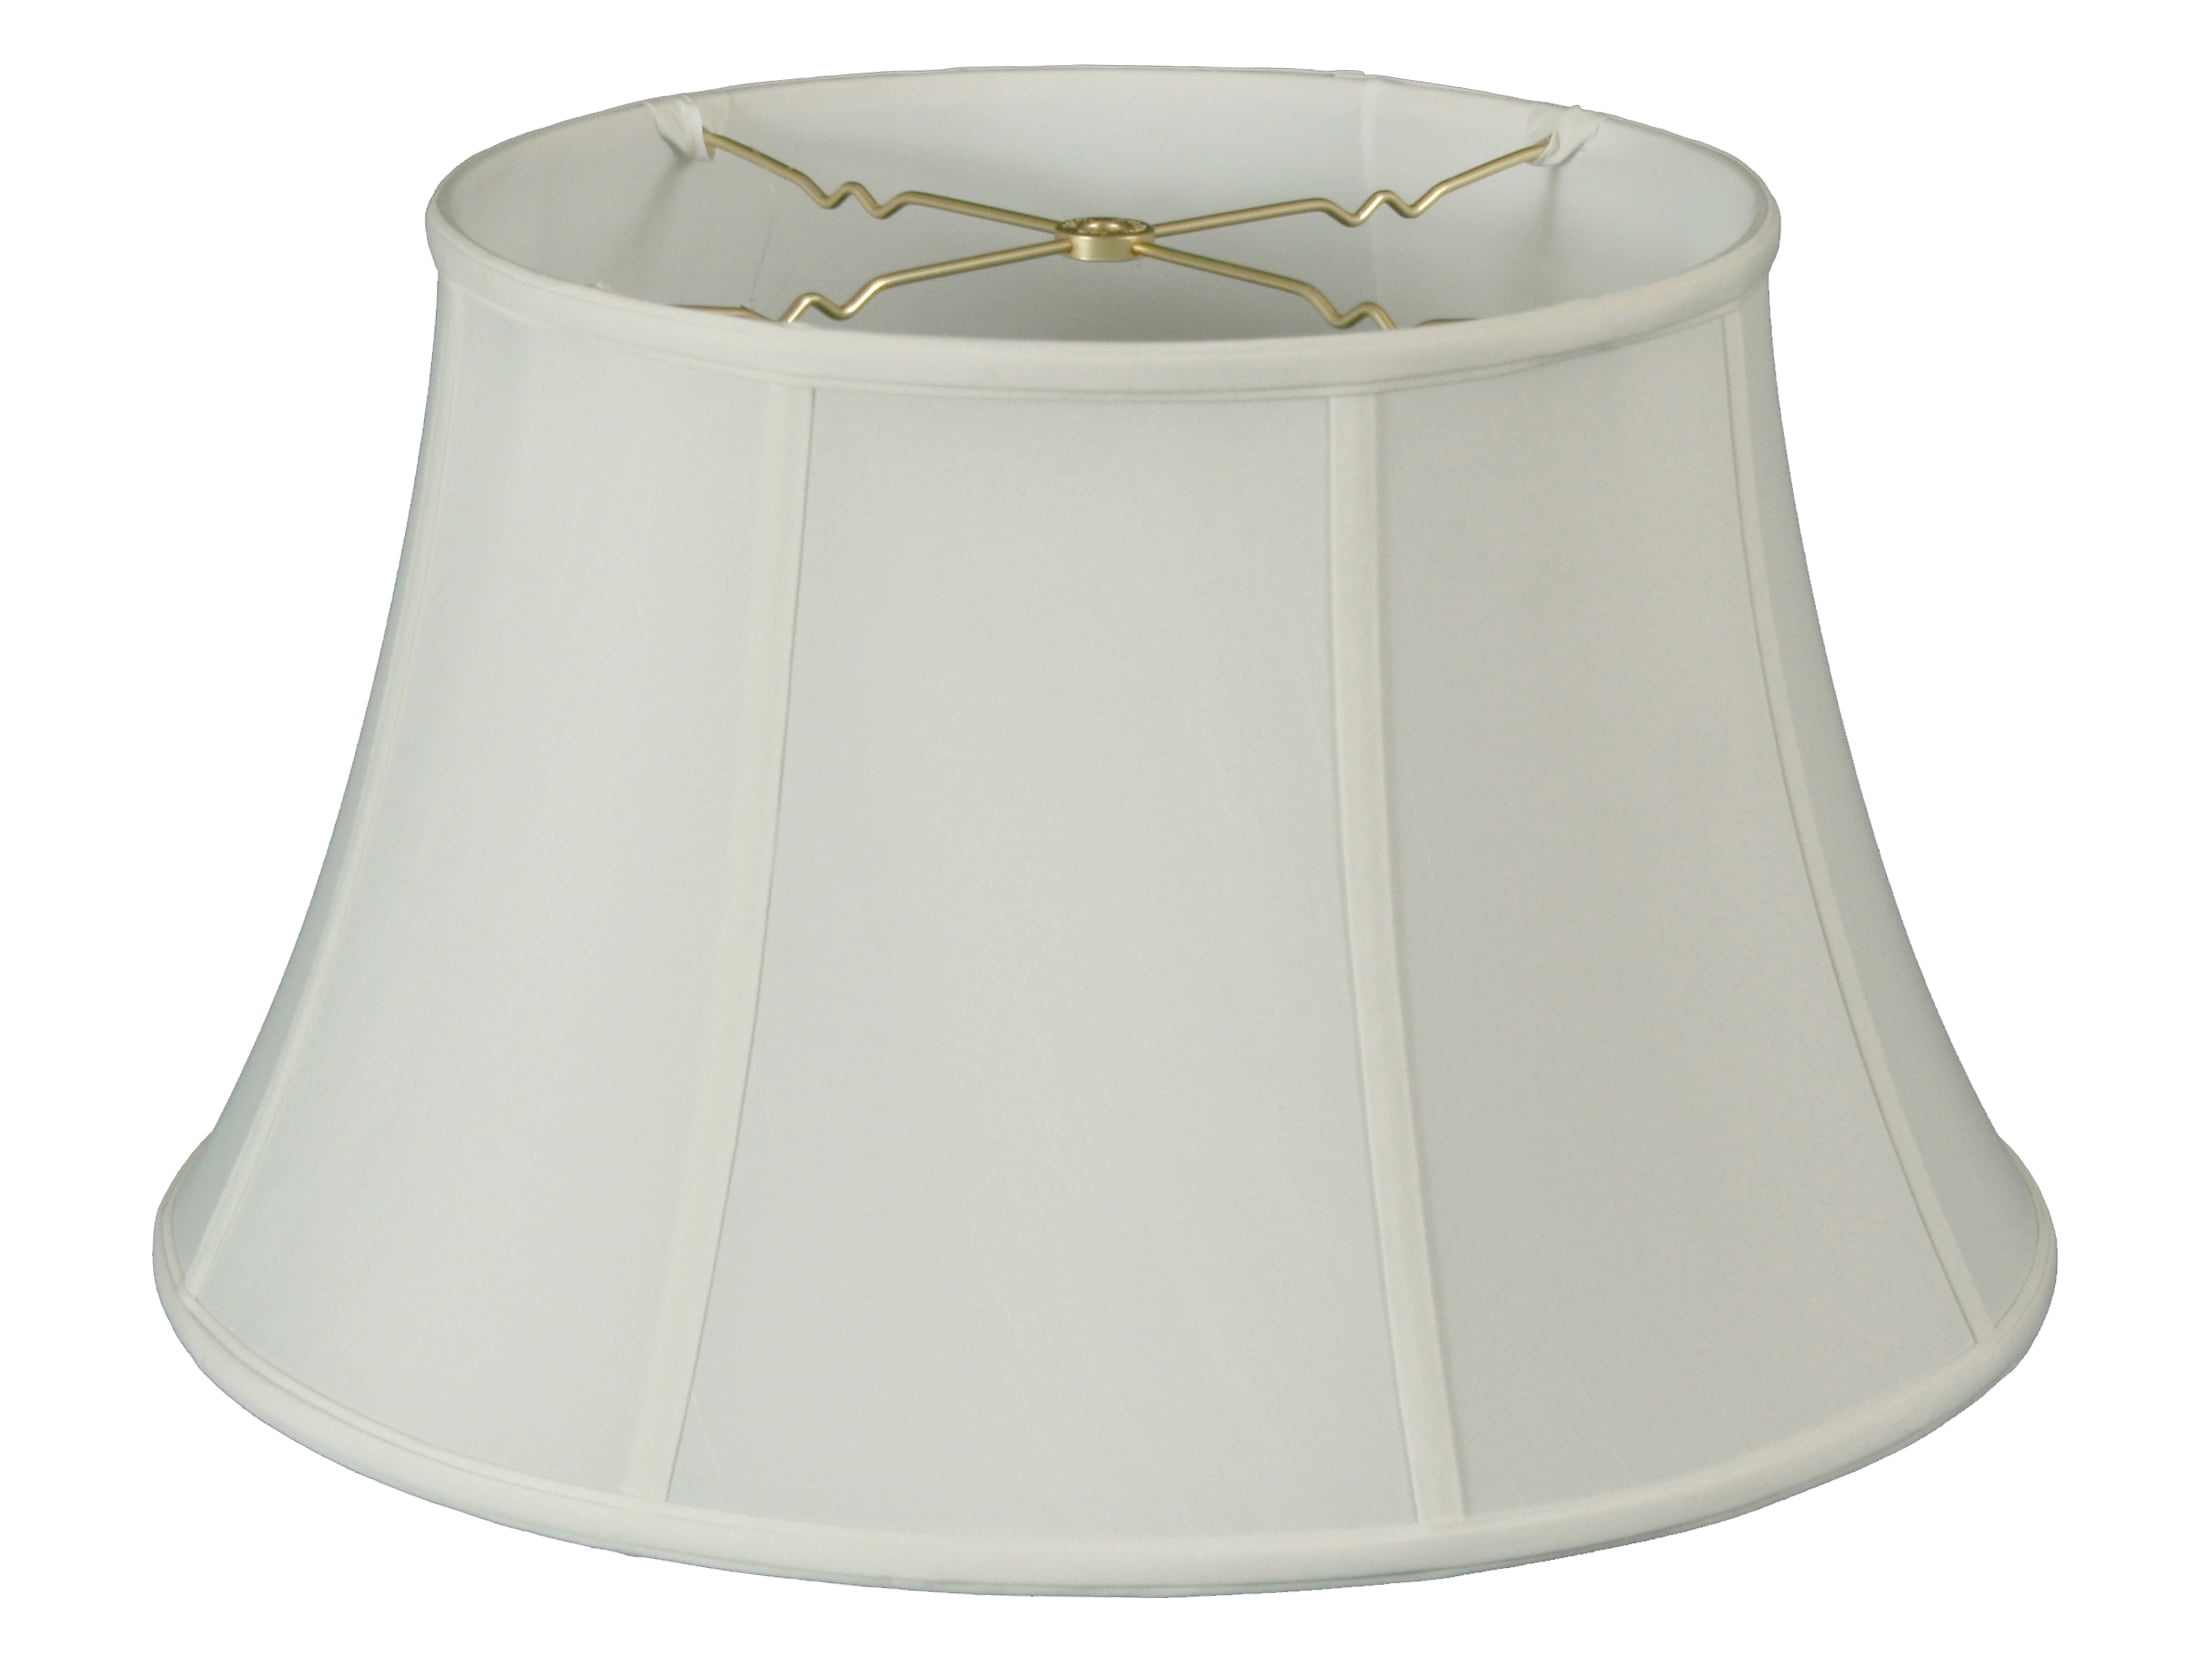 13 x 19 x 11.25 Royal Designs Shallow Drum Bell Billiotte Lamp Shade in White